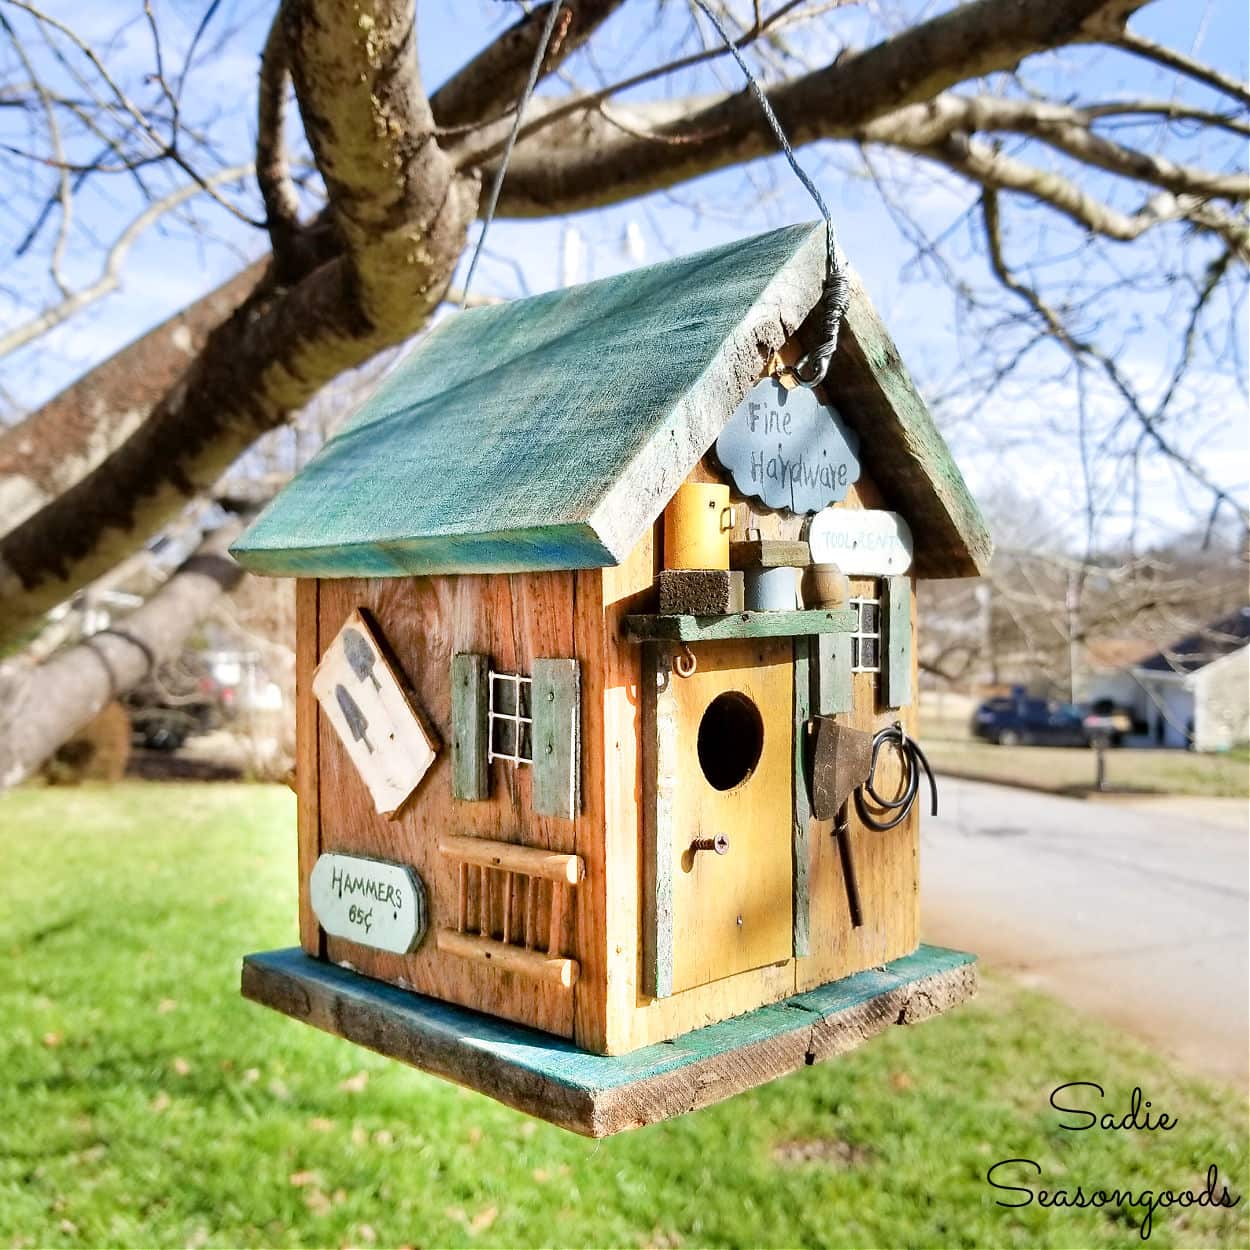 Repairing a Rustic Birdhouse with Barnwood